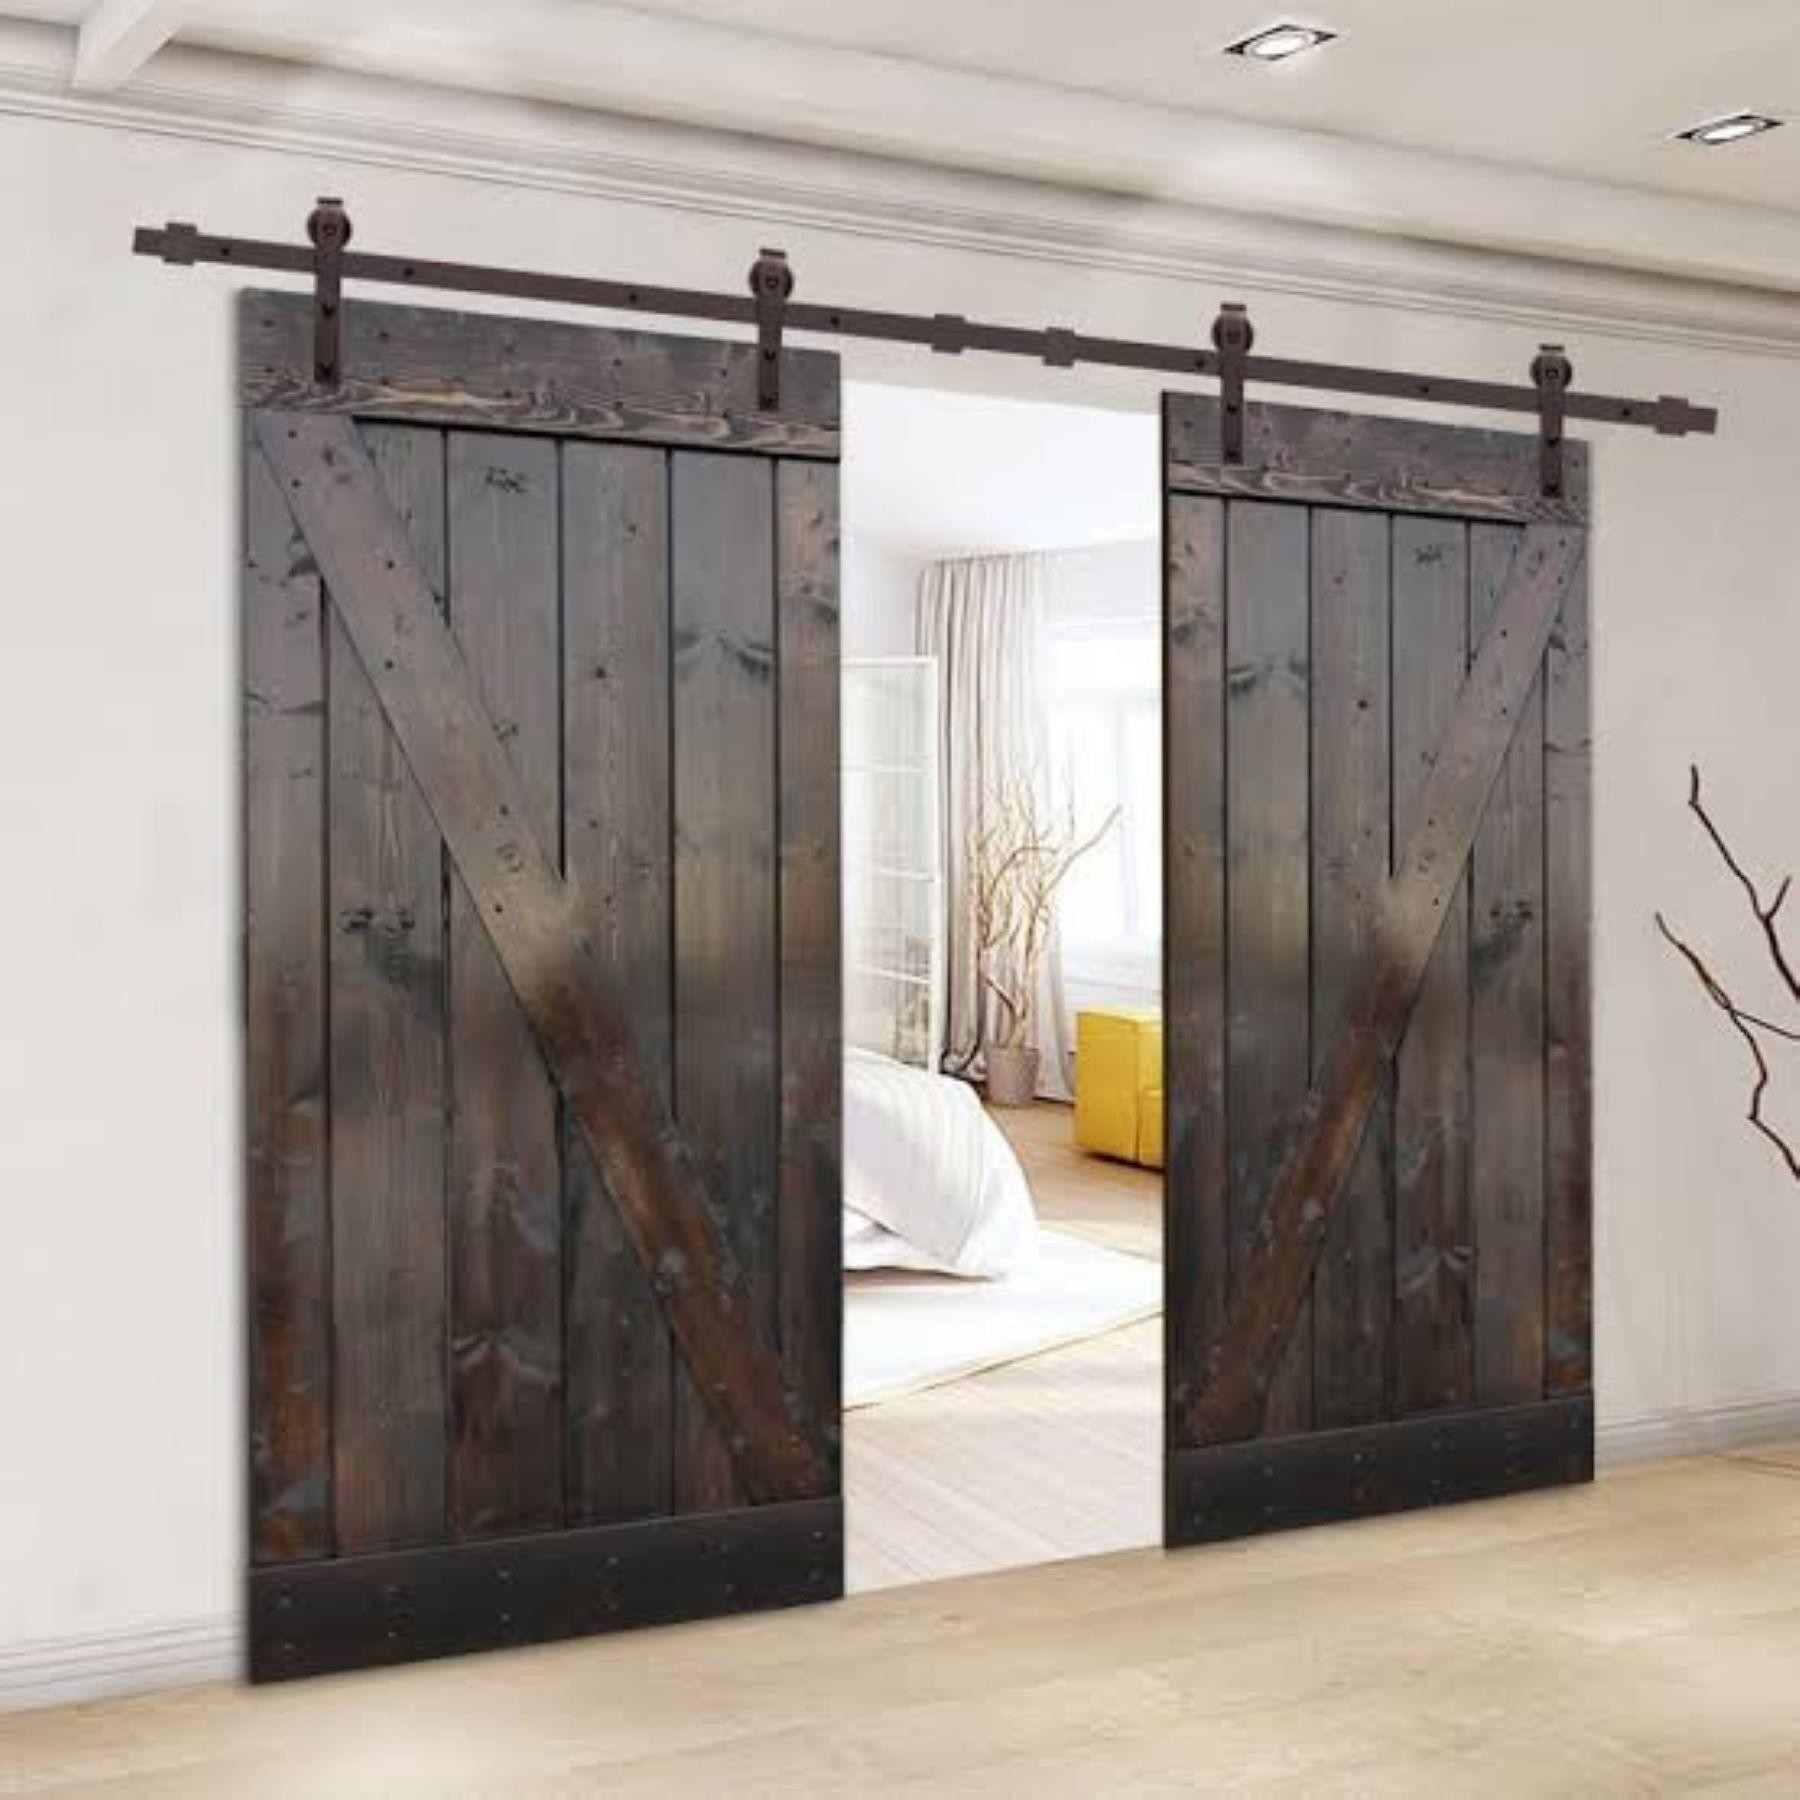 Highly Reputable Barn Door, Fittings and...Business For Sale